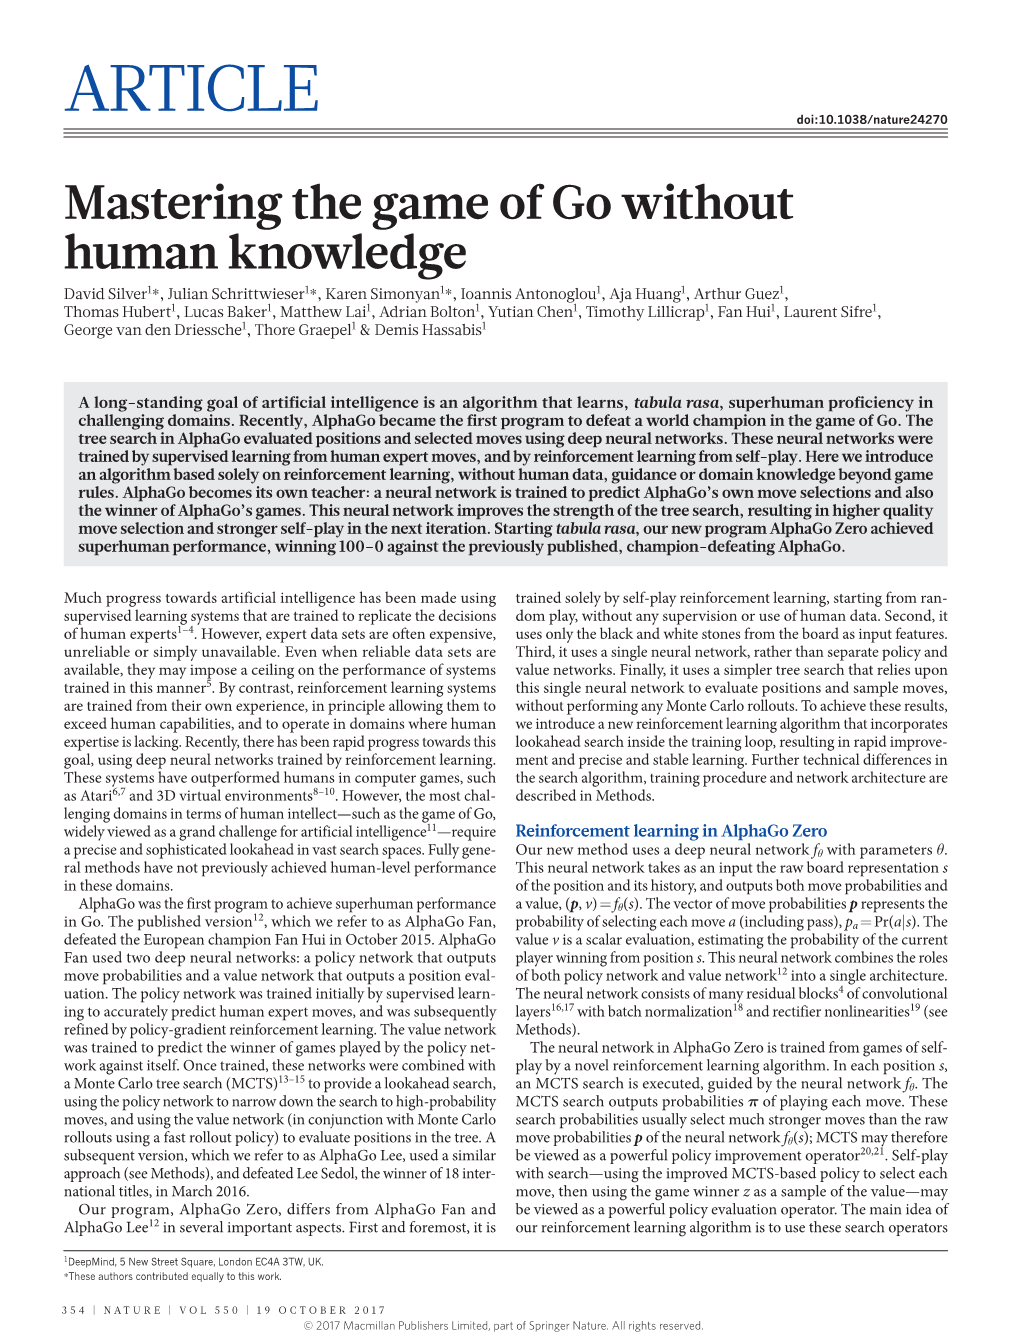 Mastering the Game of Go Without Human Knowledge